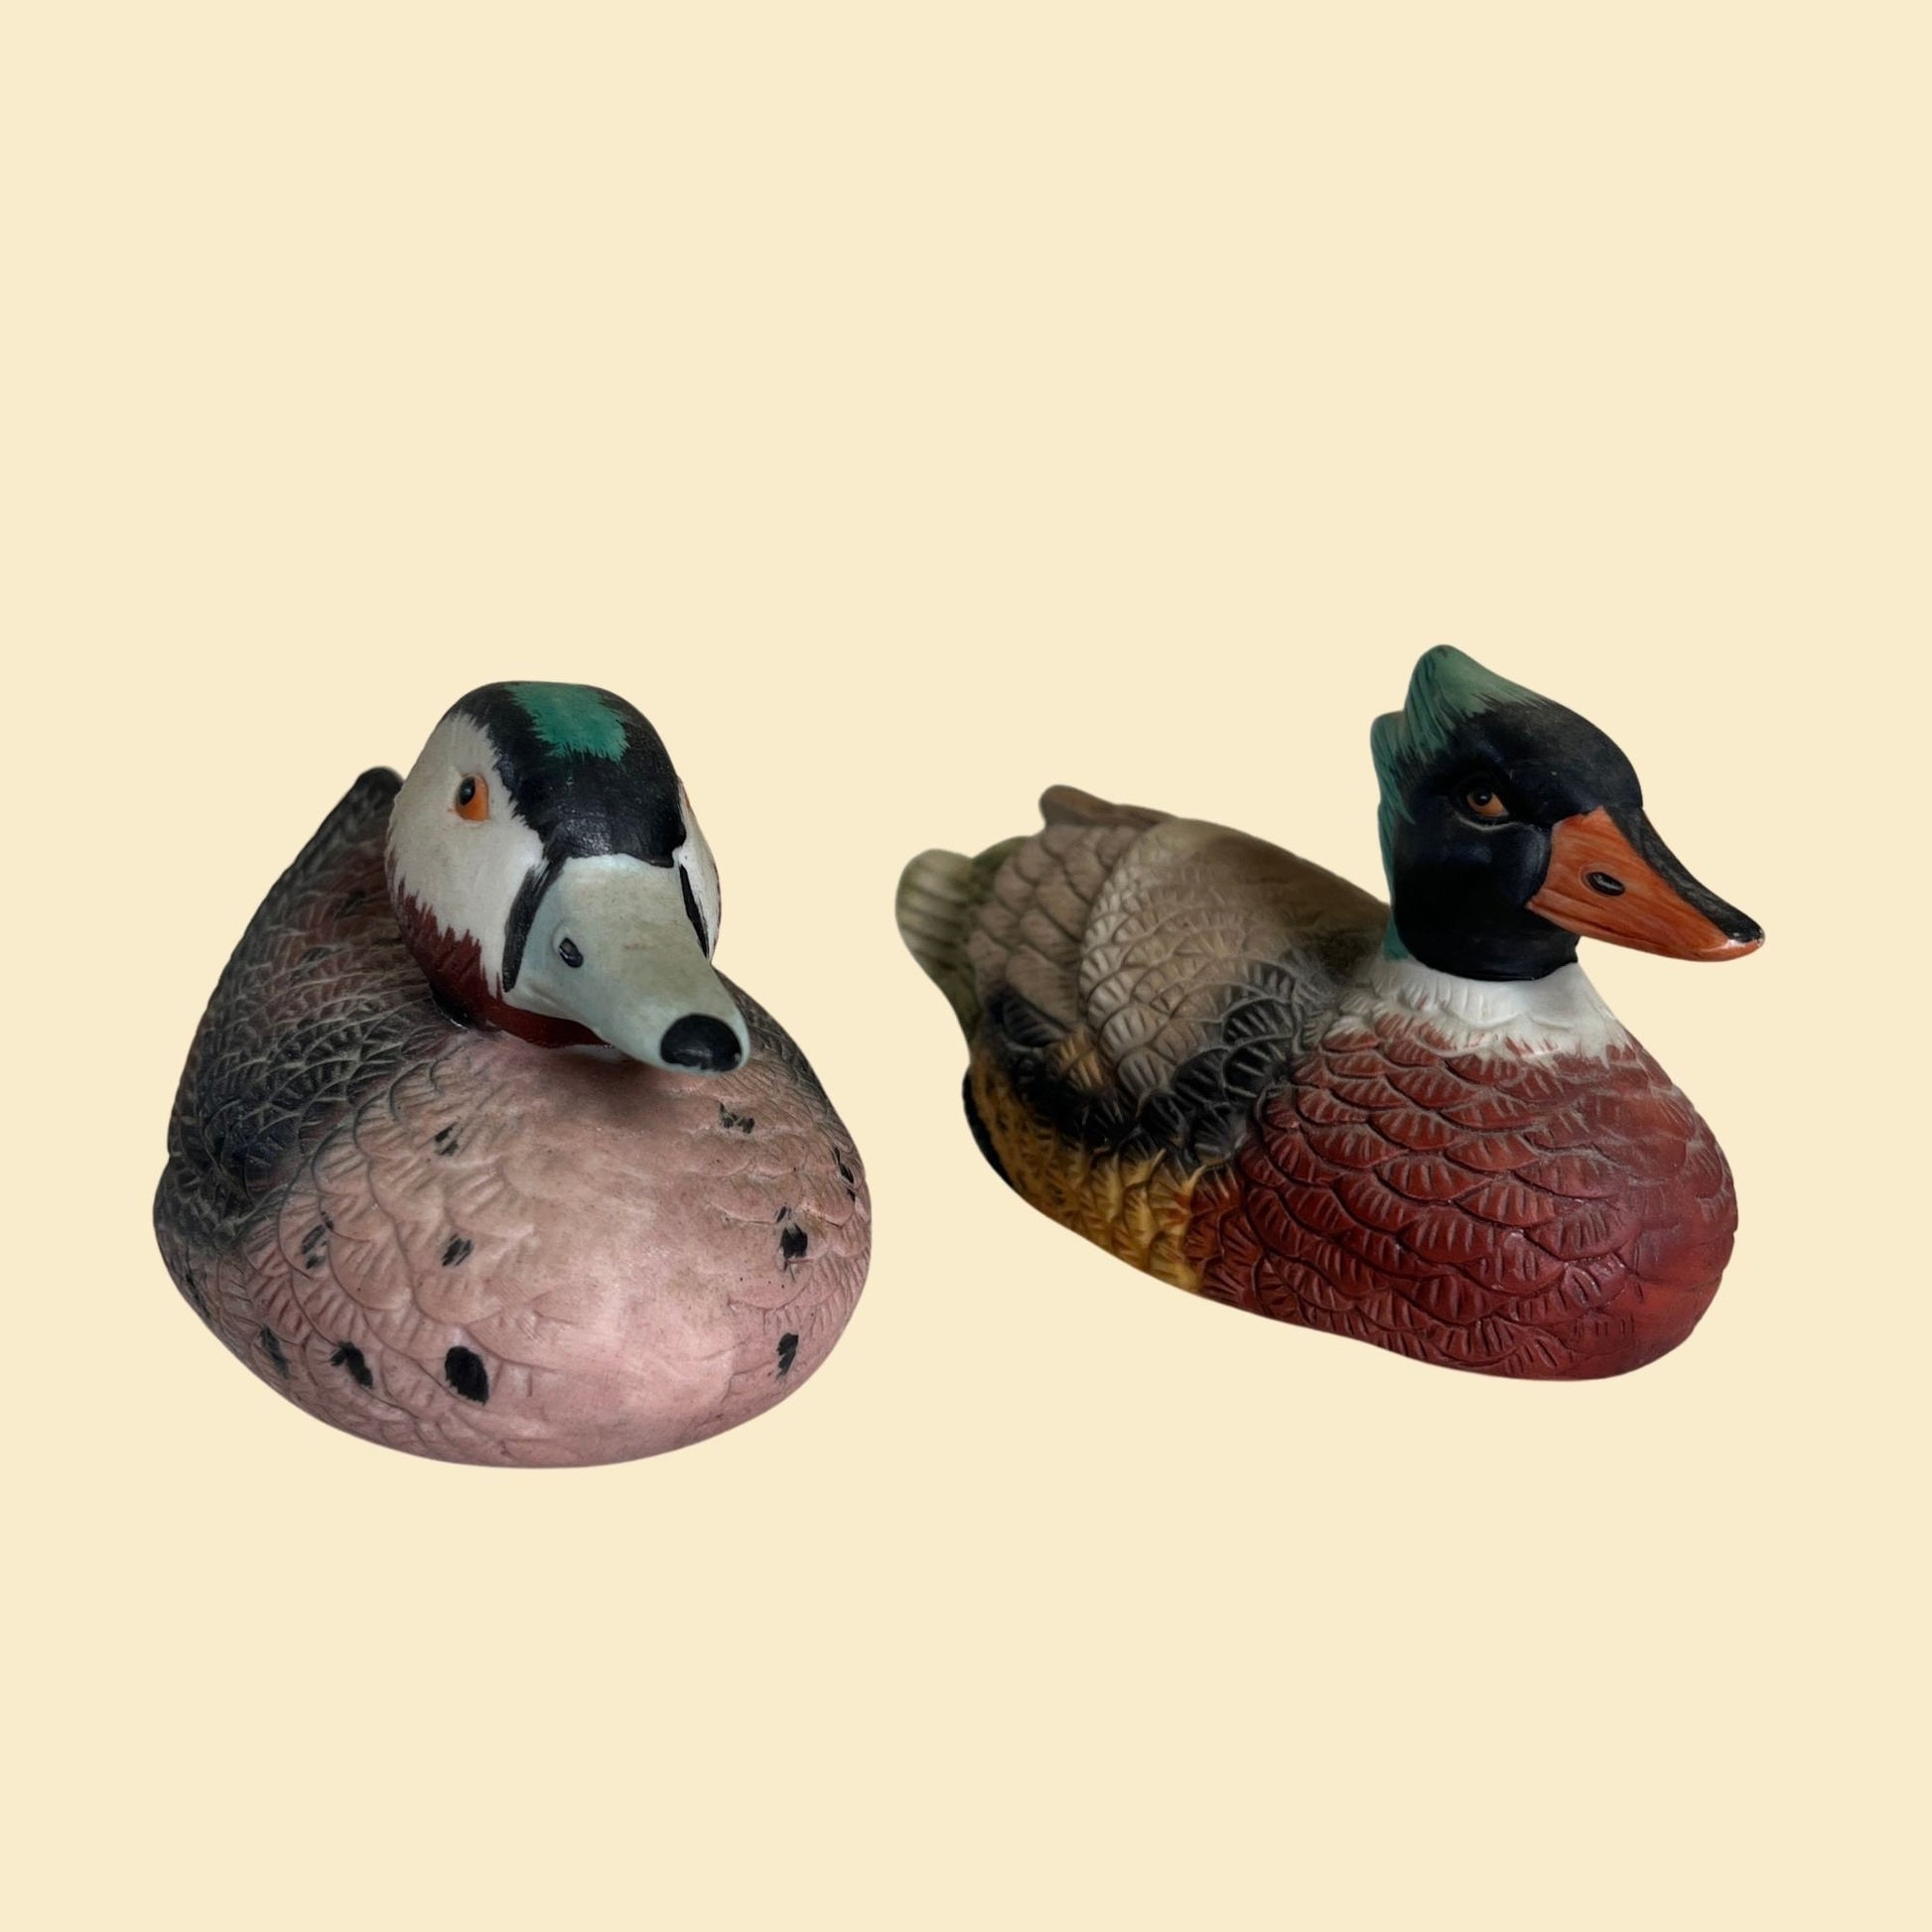 Vintage ceramic duck figurines, set of two 1980s painted duck statues